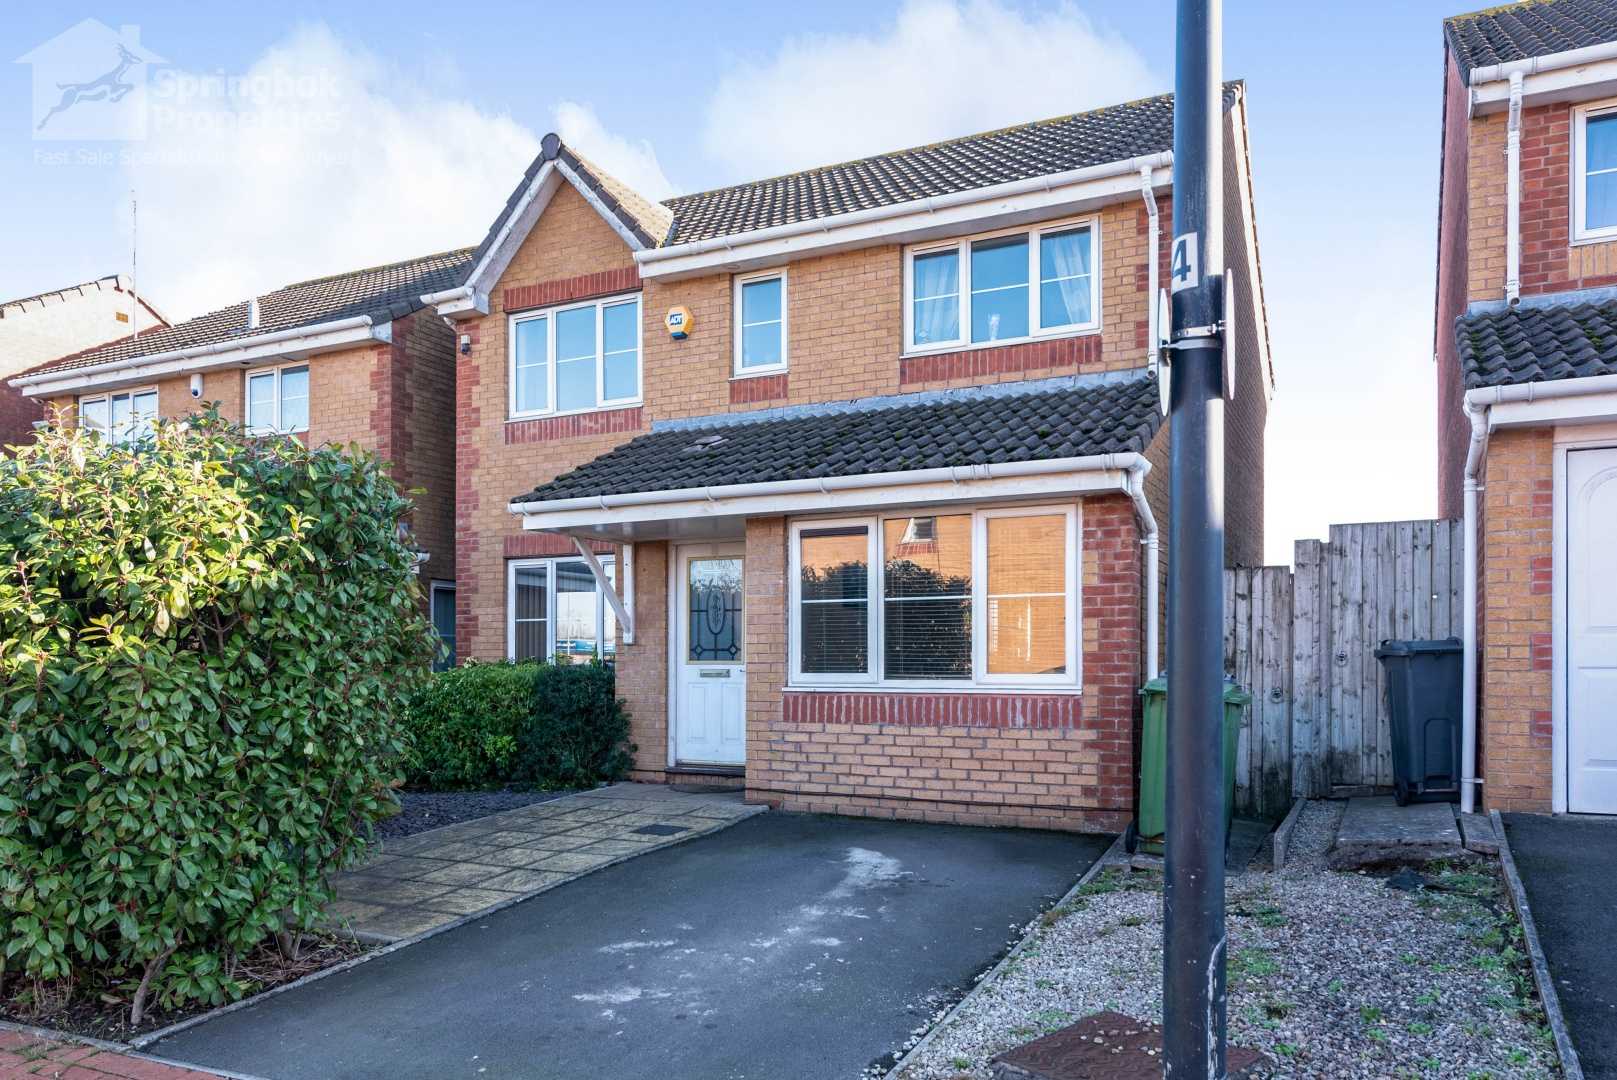 House in Saint Mellons, Cardiff 11392194